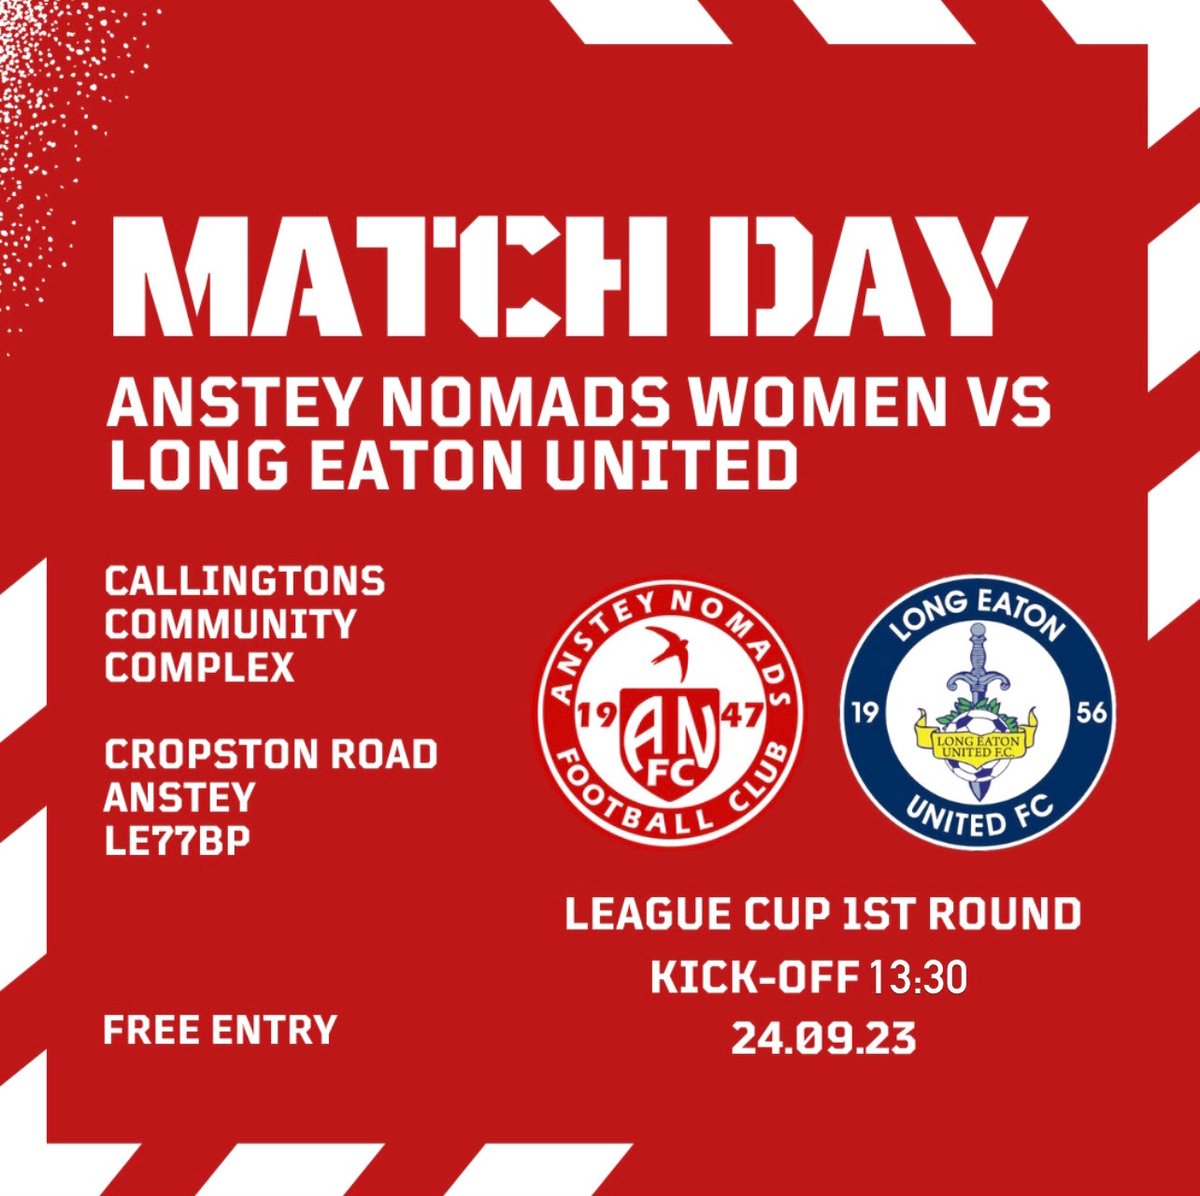 MATCH DAY ⚽️ We return home this afternoon to face Long Eaton United in the first round of the League Cup. 📆 Sunday 24th September ⏰ 1:30pm KO 🆚 @LEUFCLadies 🏆 1st Round League Cup 📍Callingtons Community Complex, Cropston Road, Anstey, LE77BP 🎟️ FREE ENTRY #UPTHENOMADS